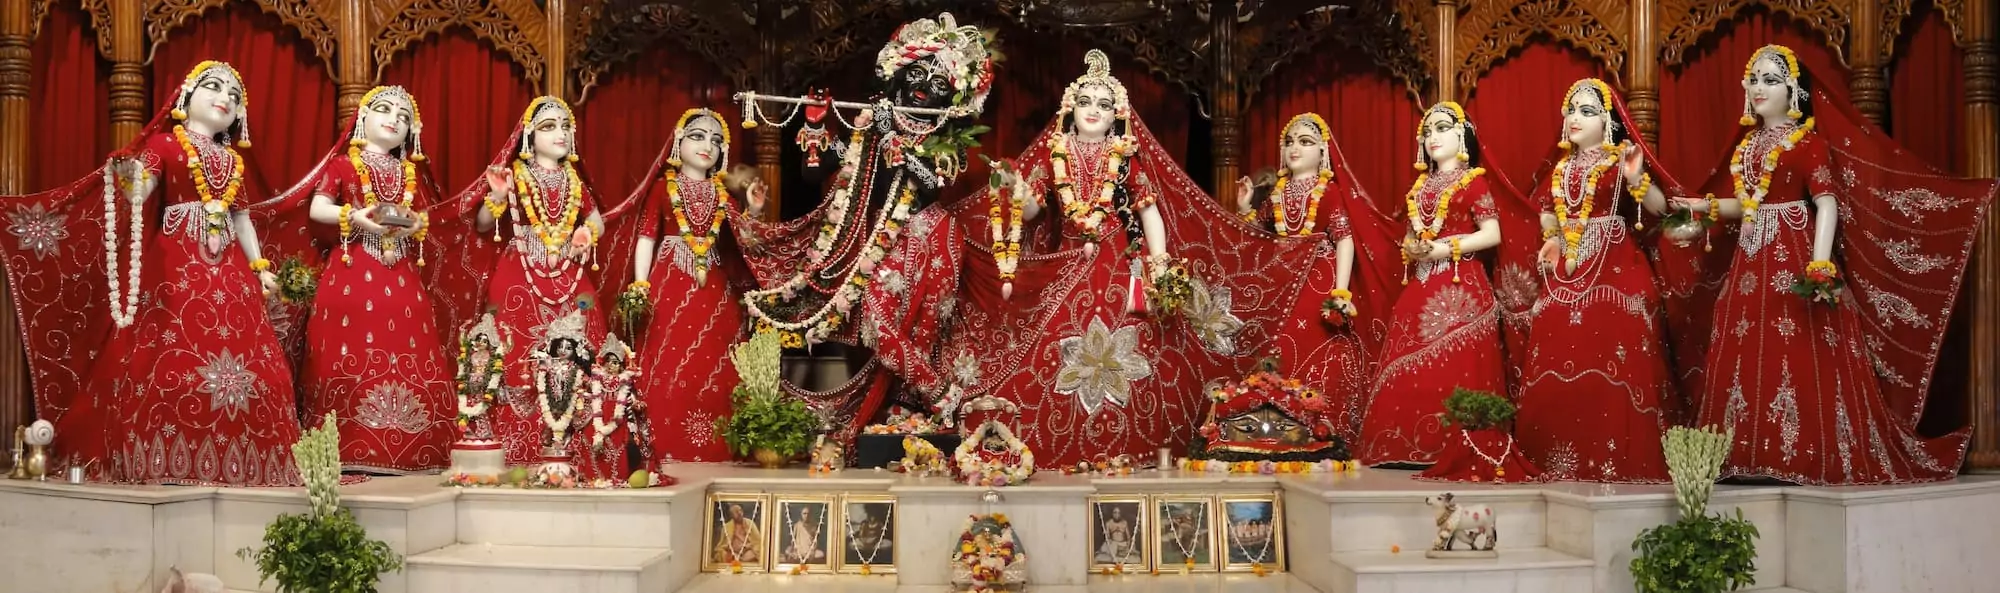 We Must Complete Radha Madhava's New Home, the TOVP